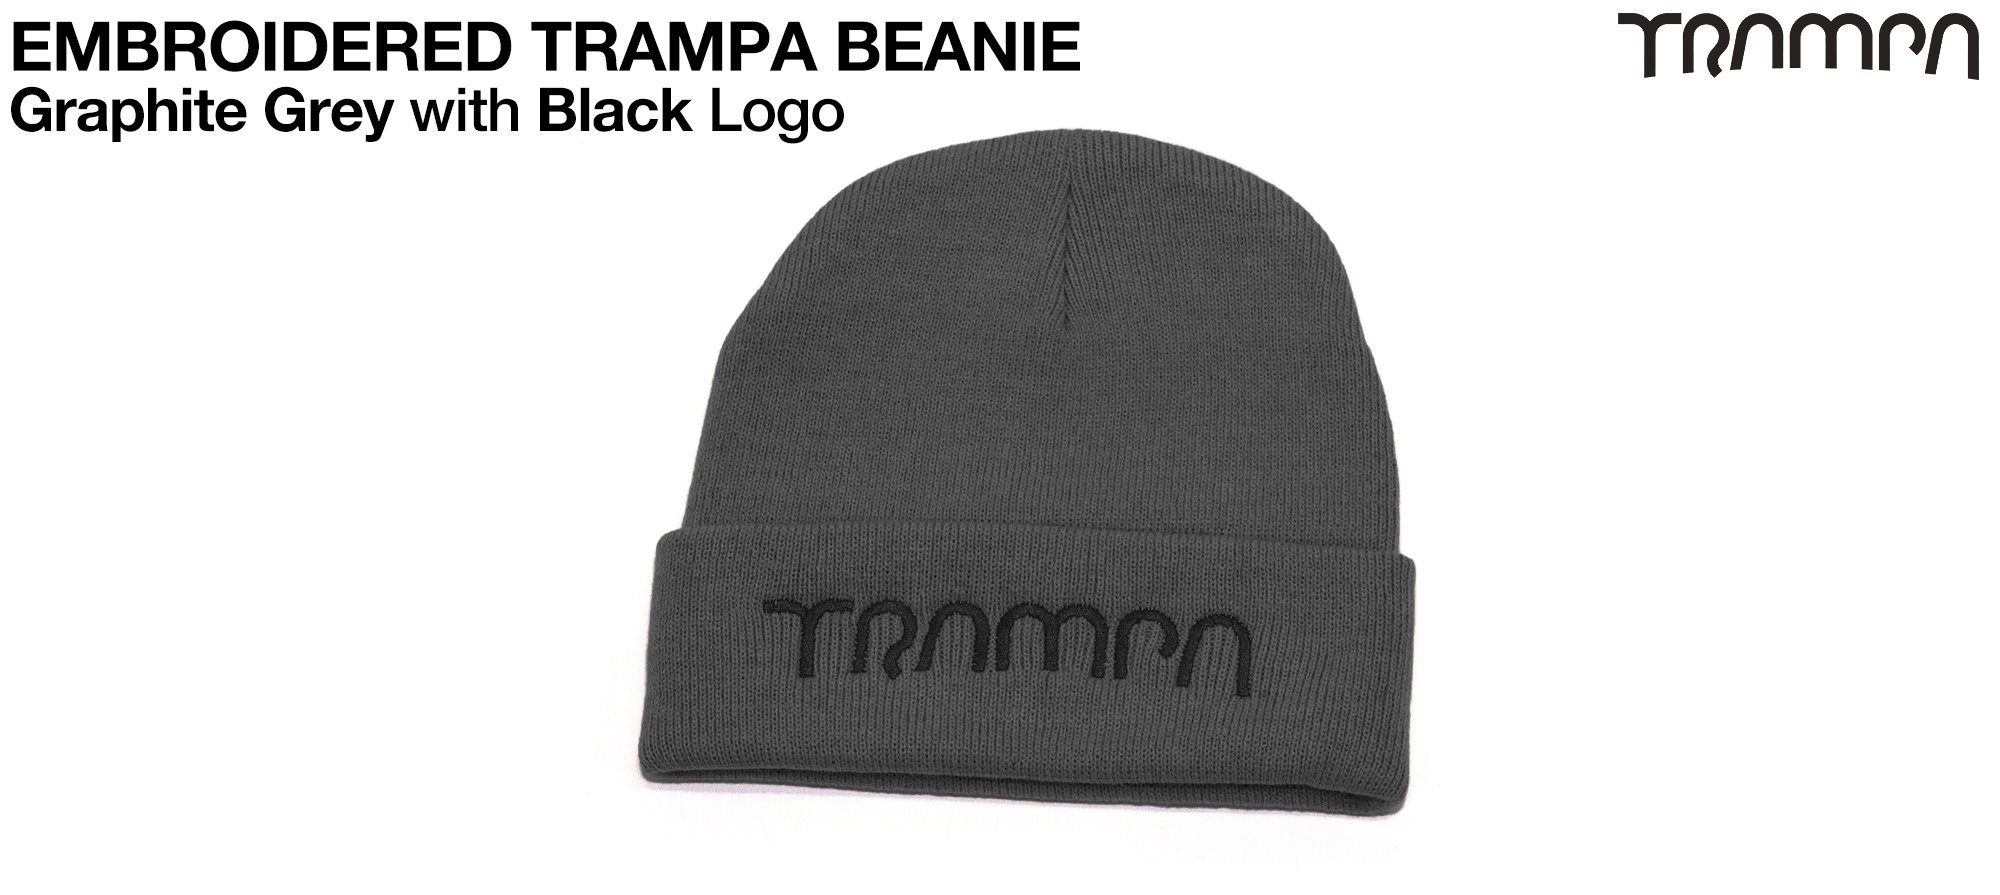 Graphite GREY Beanie with EMBROIDERED TRAMPA logo  (£12.50) (out of stock)